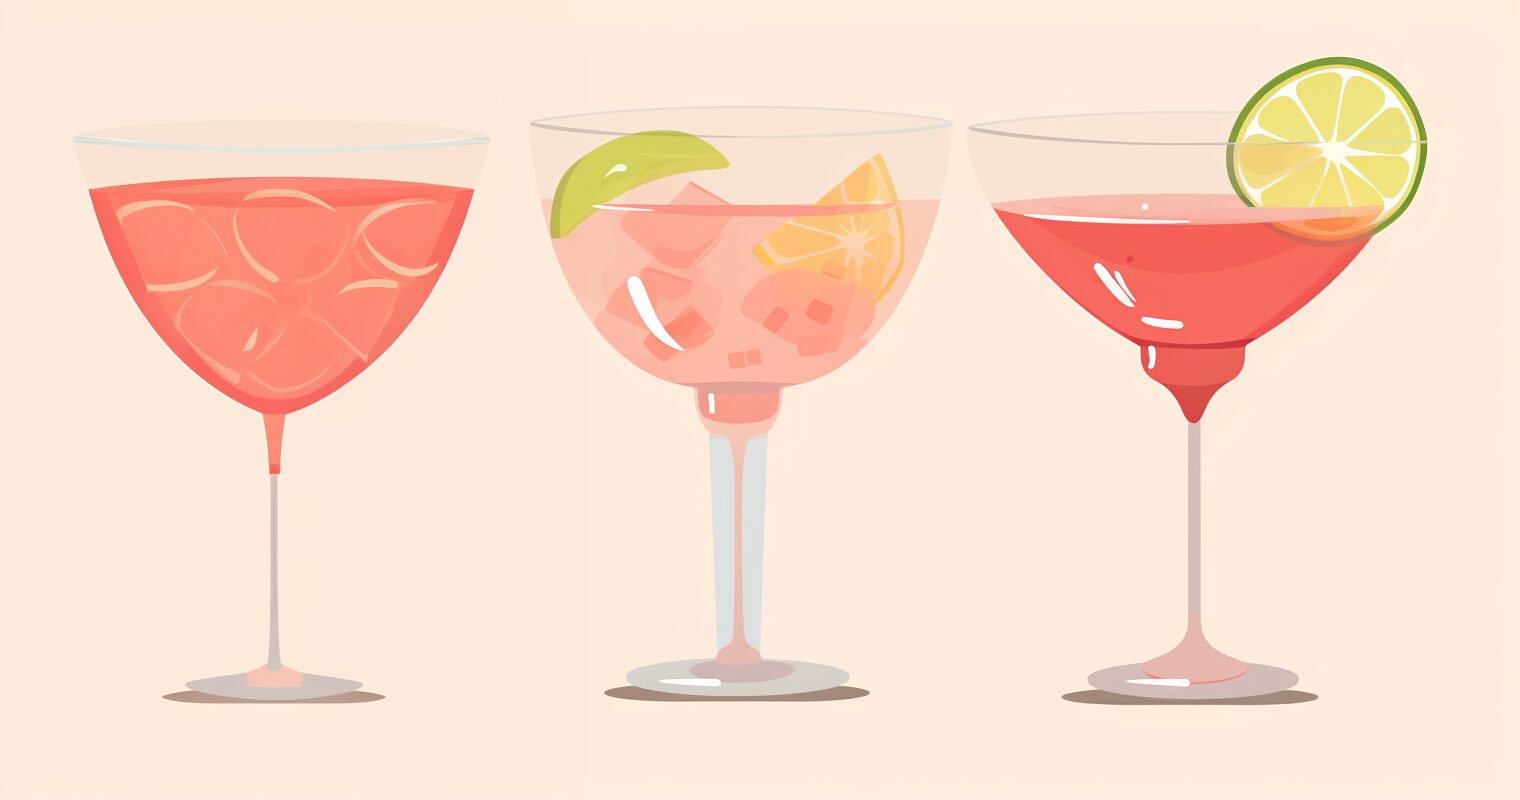 Three cocktail glasses with different drinks in them.